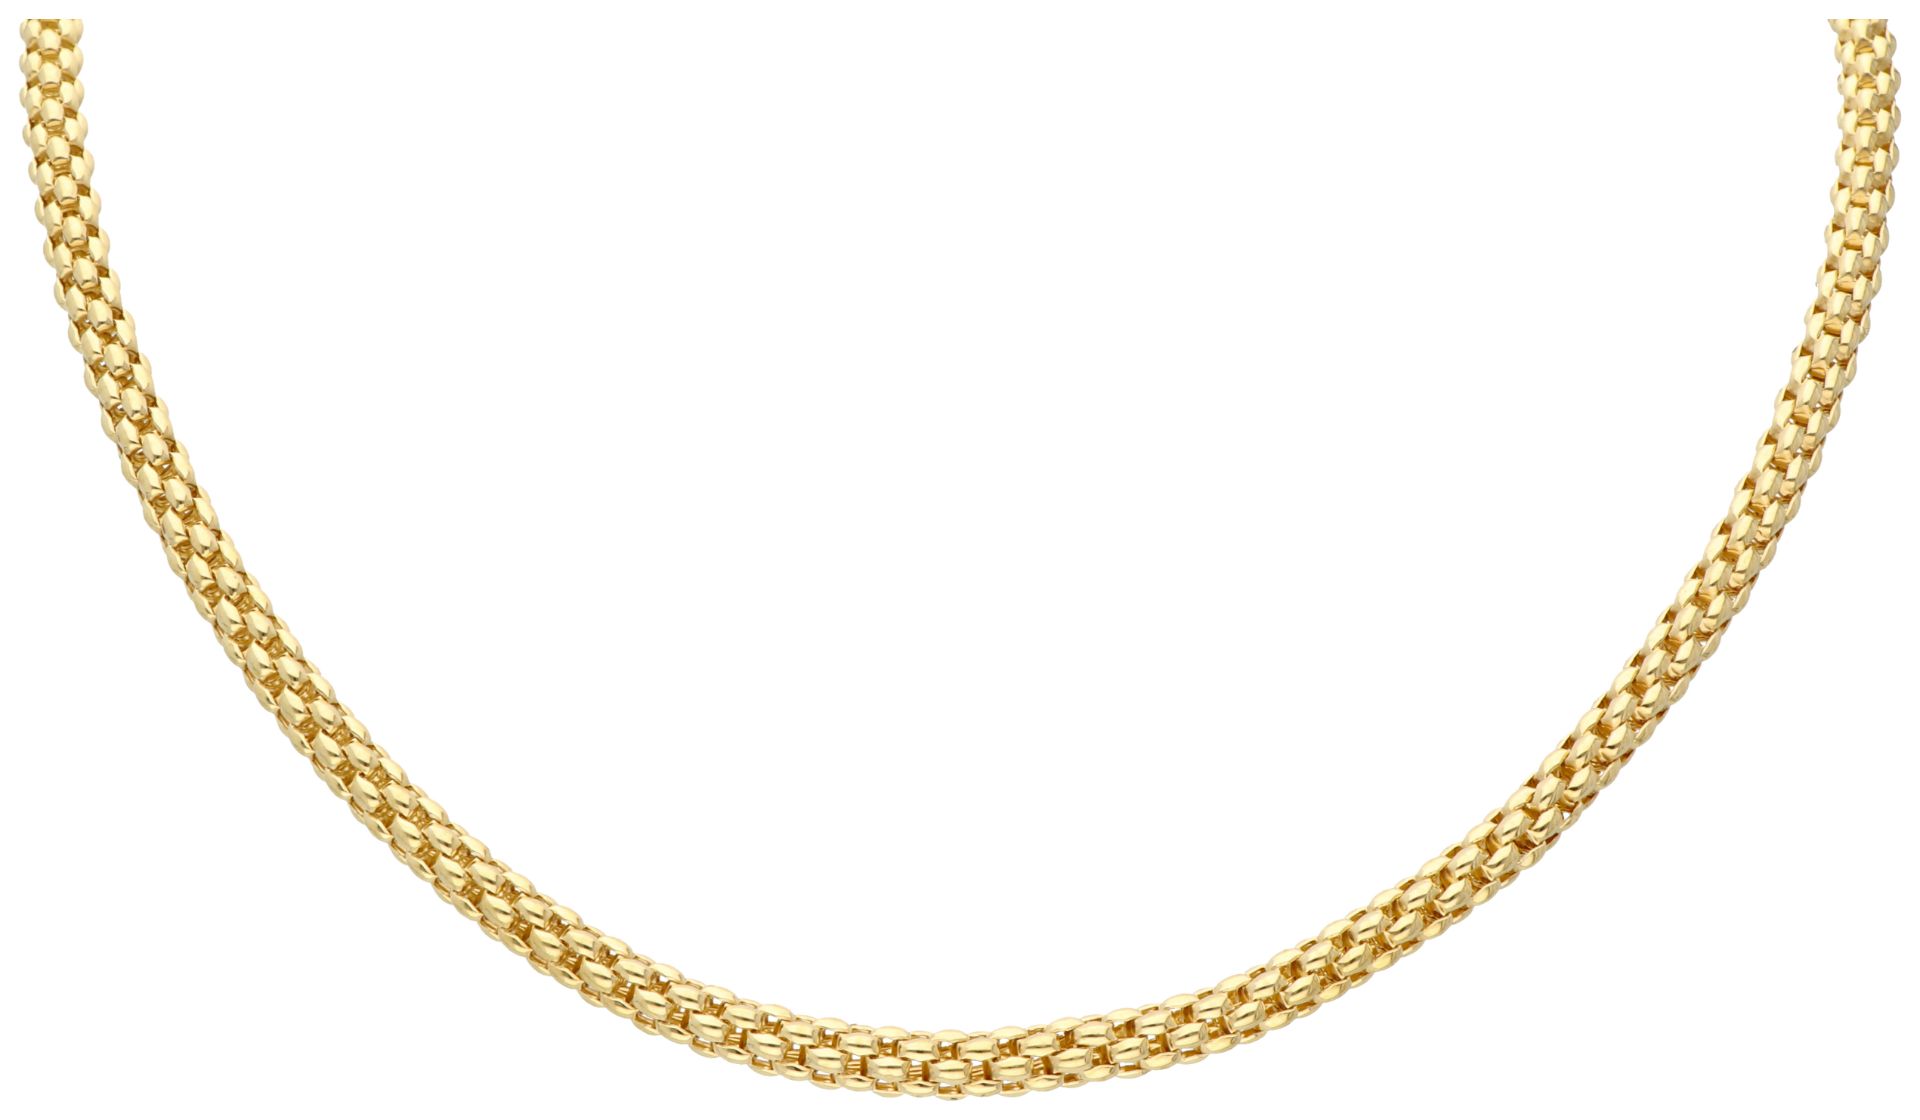 Fope 18K yellow gold necklace.